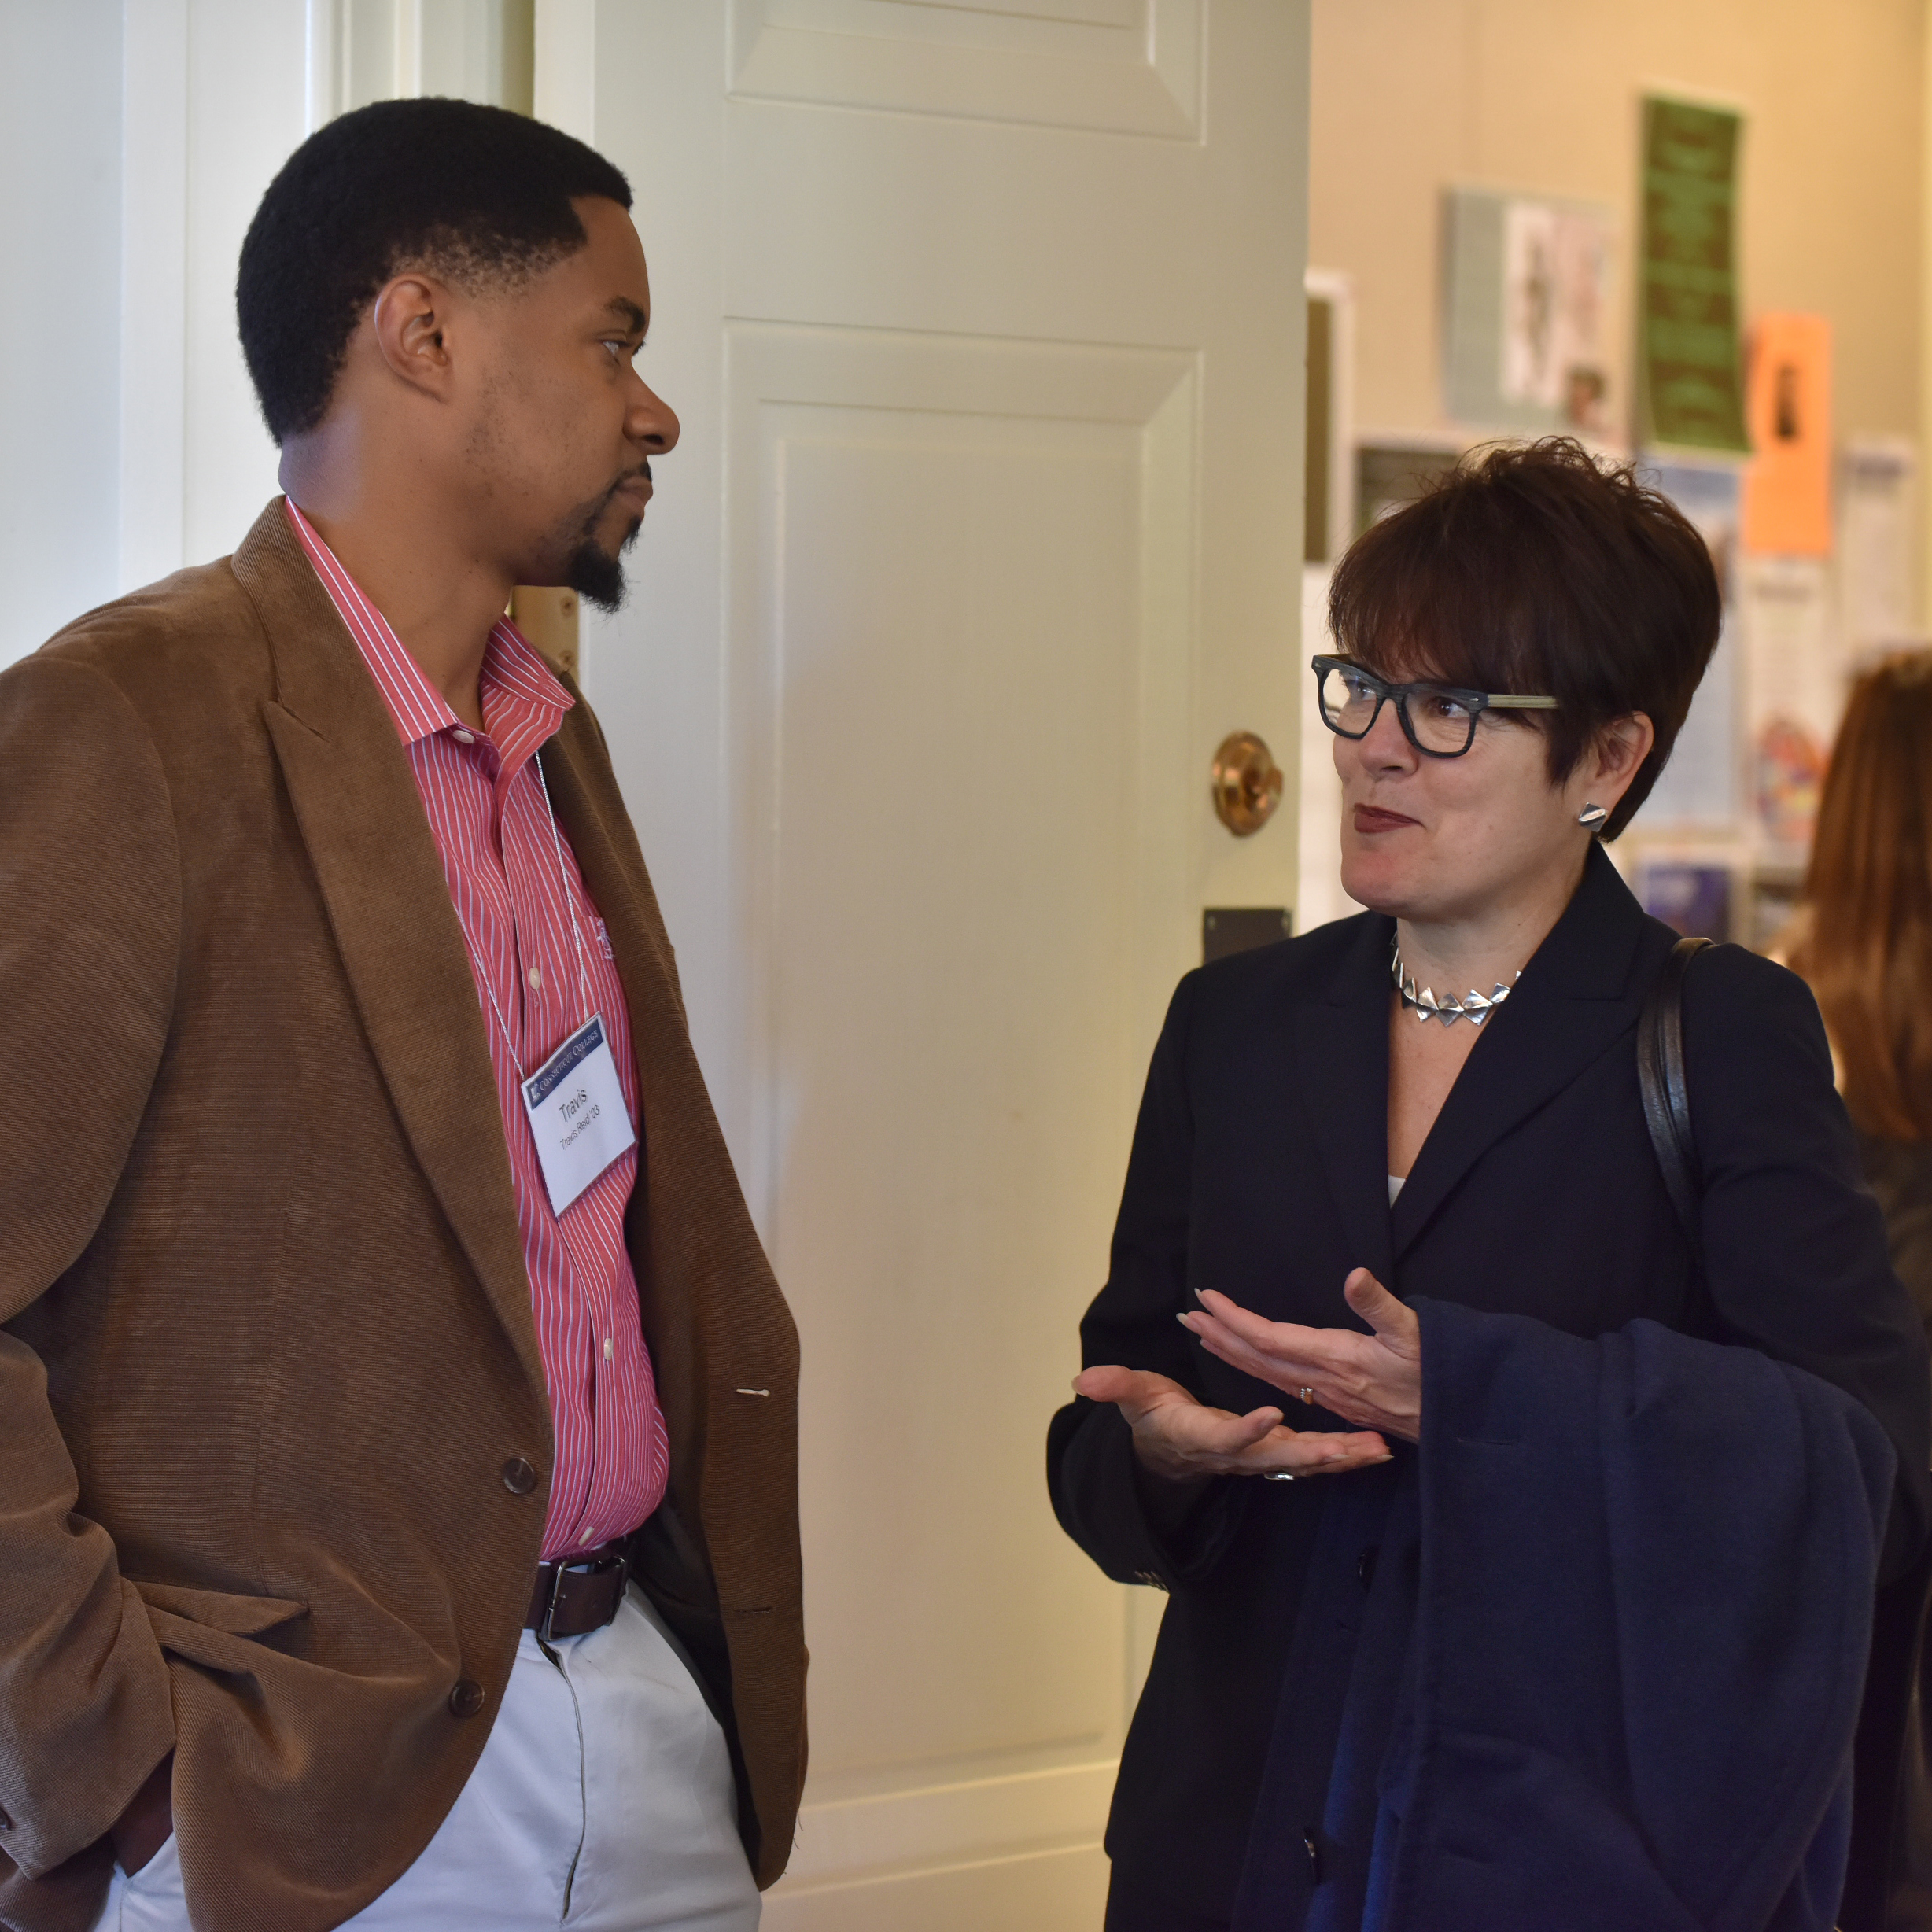 Travis Reid '03 speaks with President Katherine Bergeron prior to his keynote address at the Connecticut College Alumni of Color luncheon.